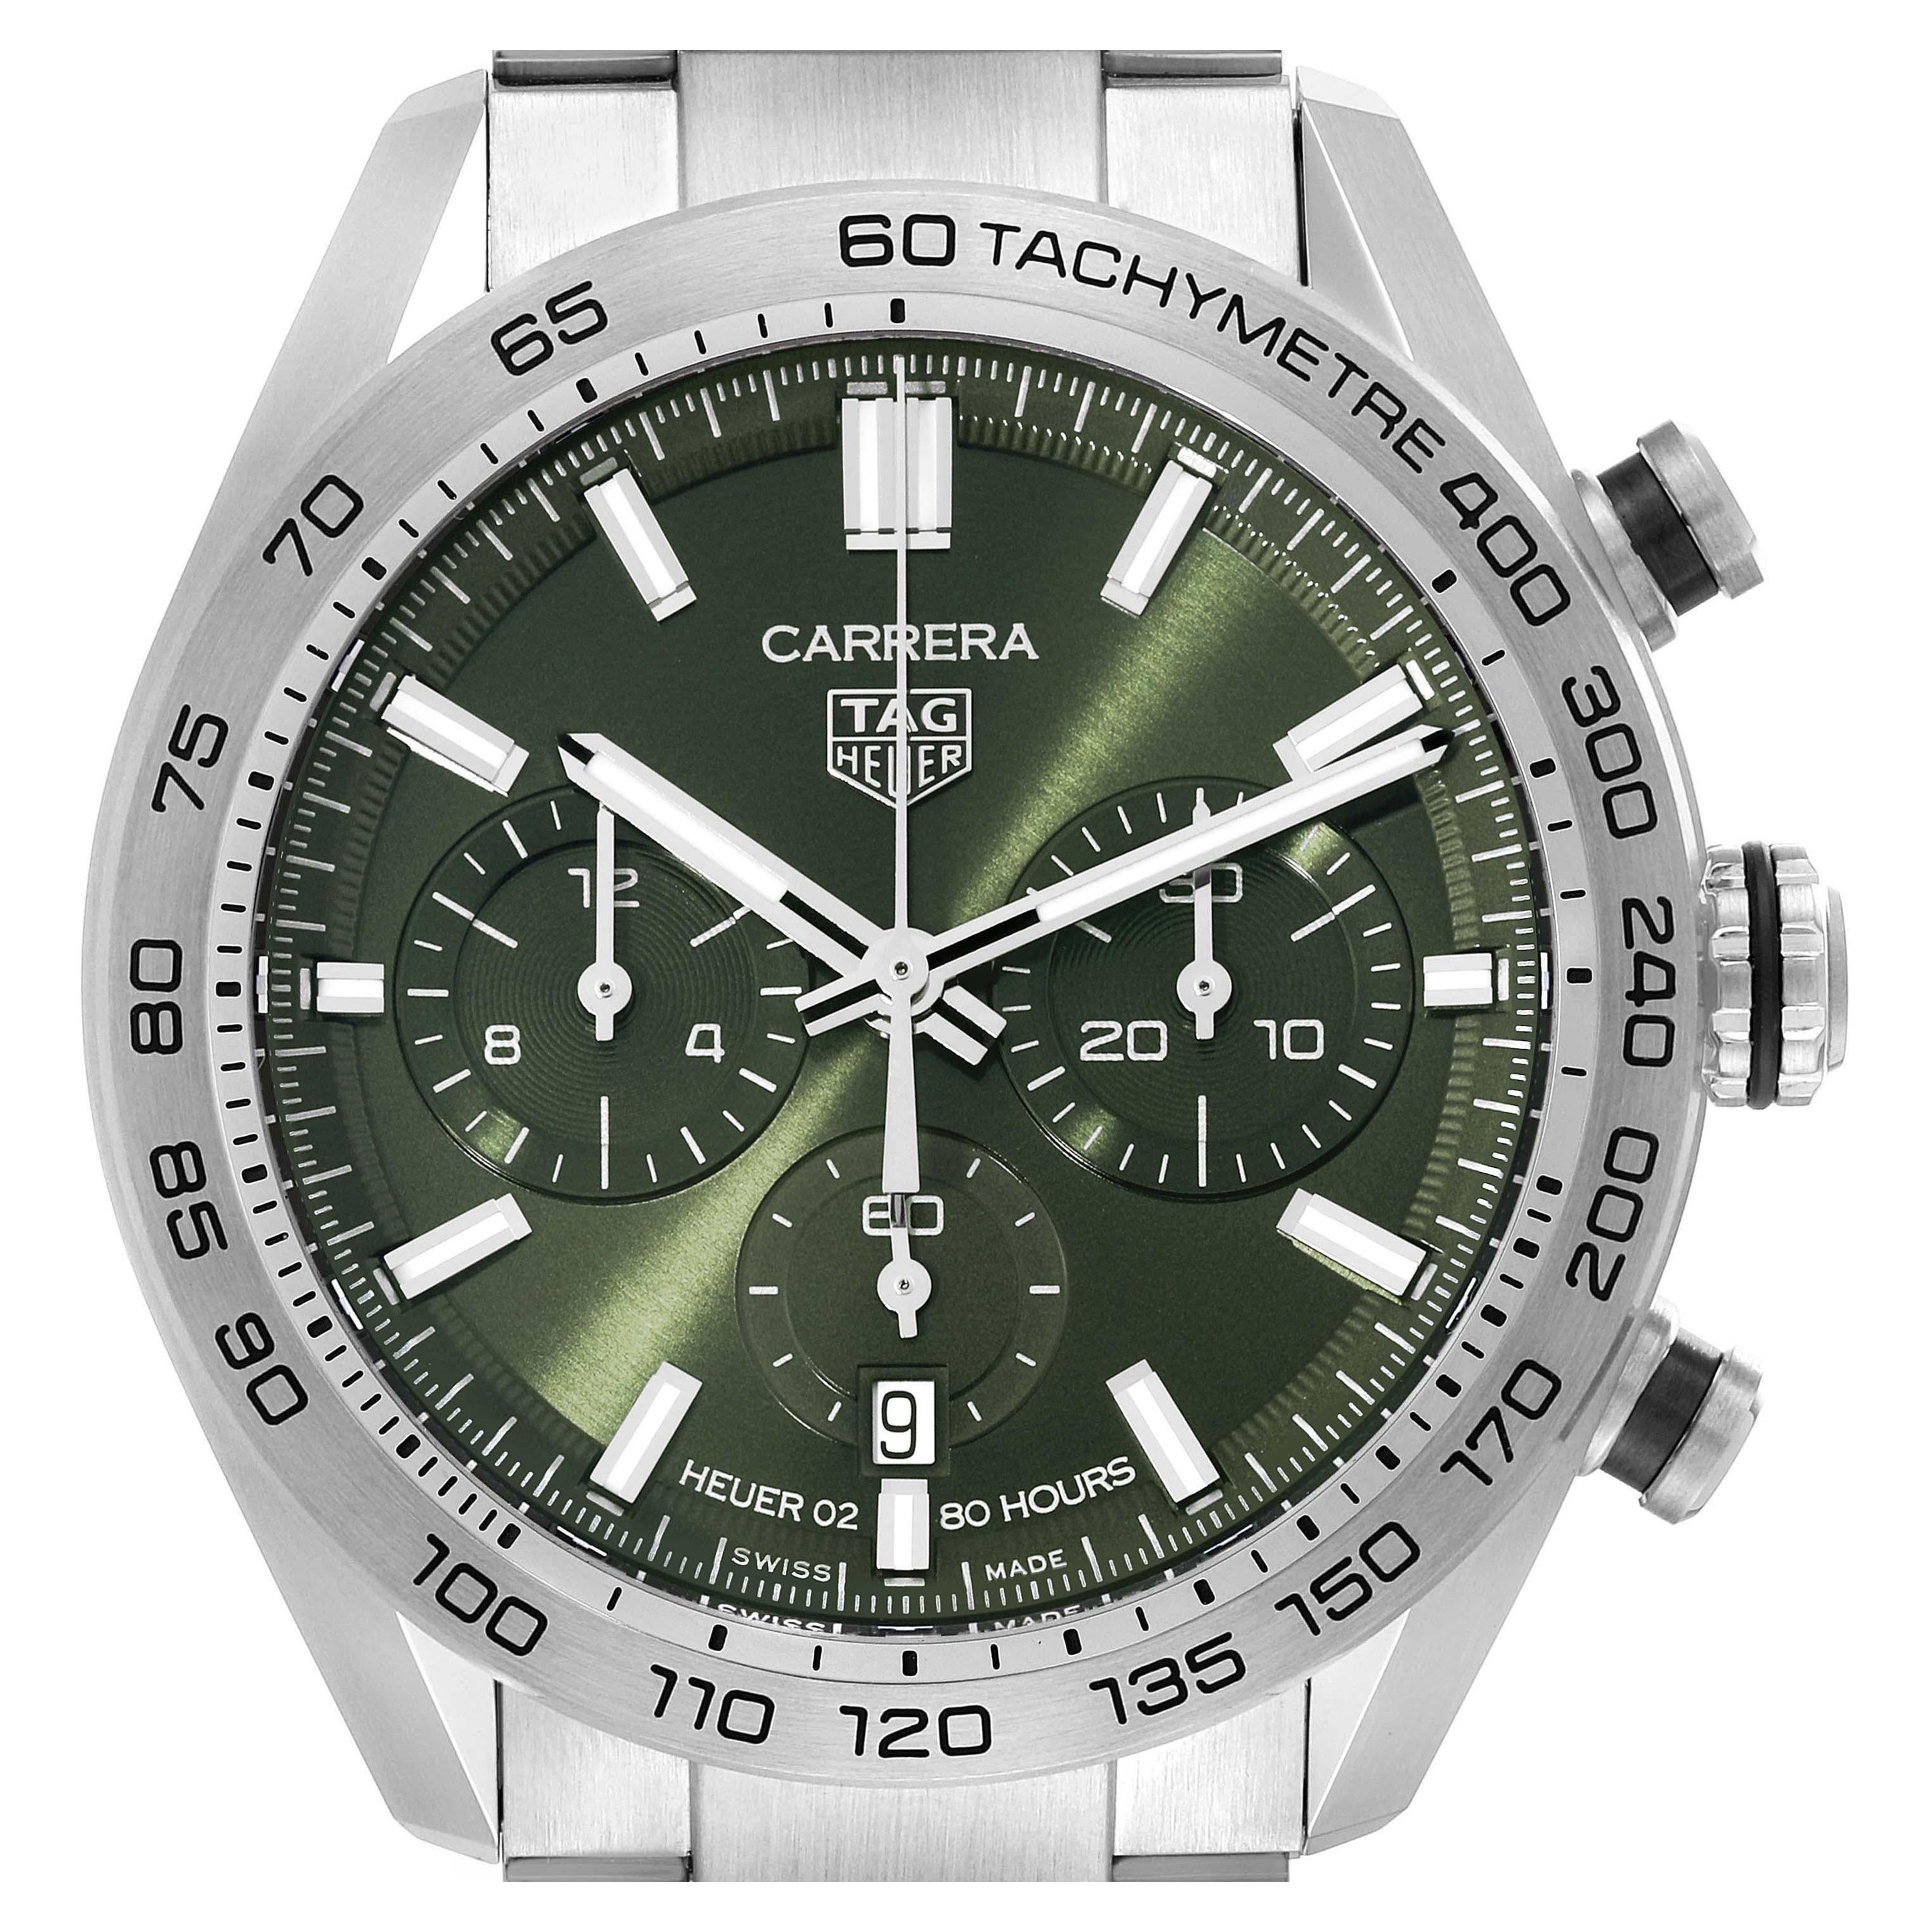 Tag Heuer Carrera Chronograph Green Dial Steel Mens Watch CBN2A10 Box Card For Sale